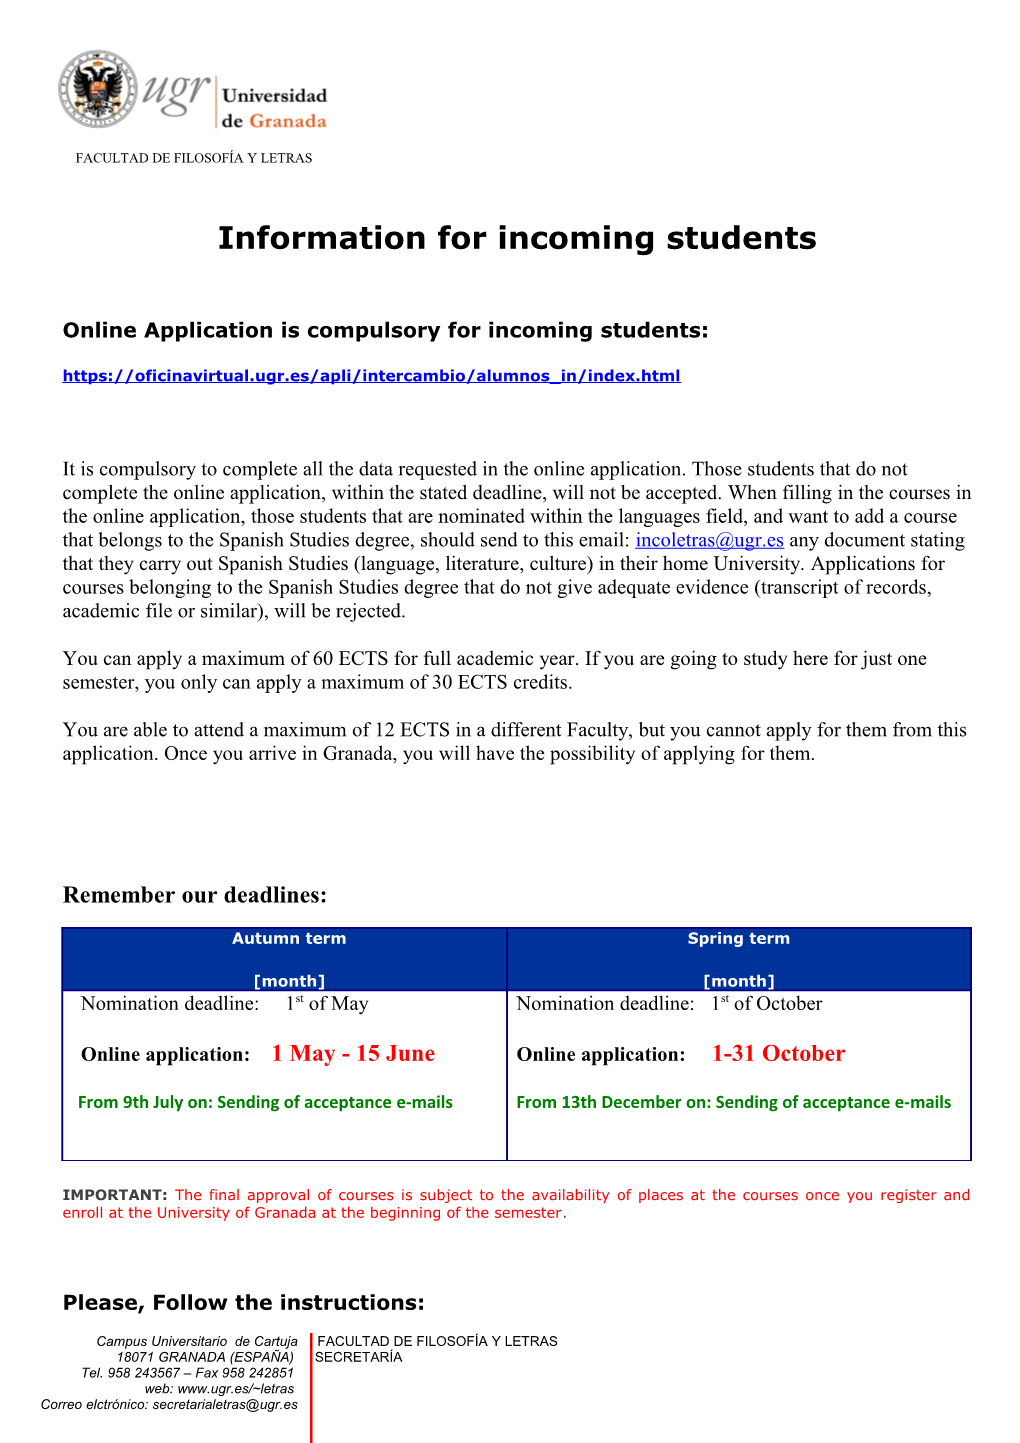 Information for Incoming Students